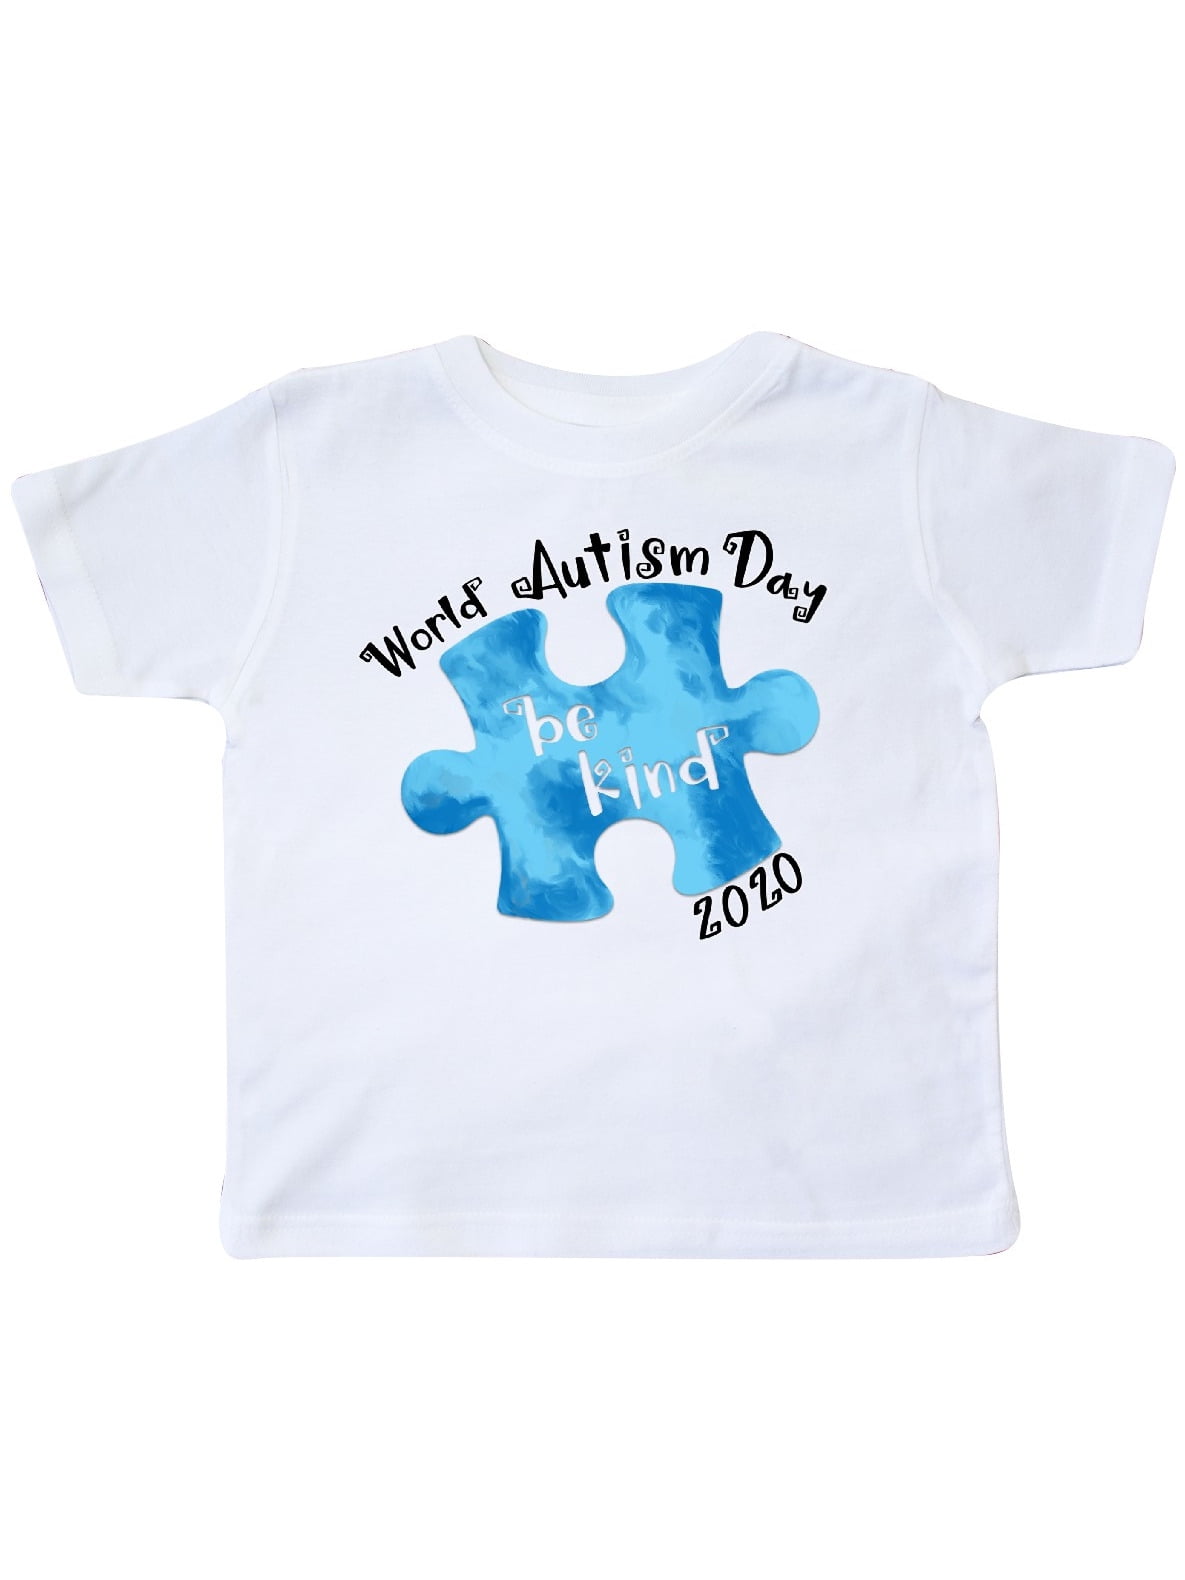 Puzzle Game Autism Day Boy Girl Newborn Short Sleeve T-Shirt 6-24 Month Cotton Tops 